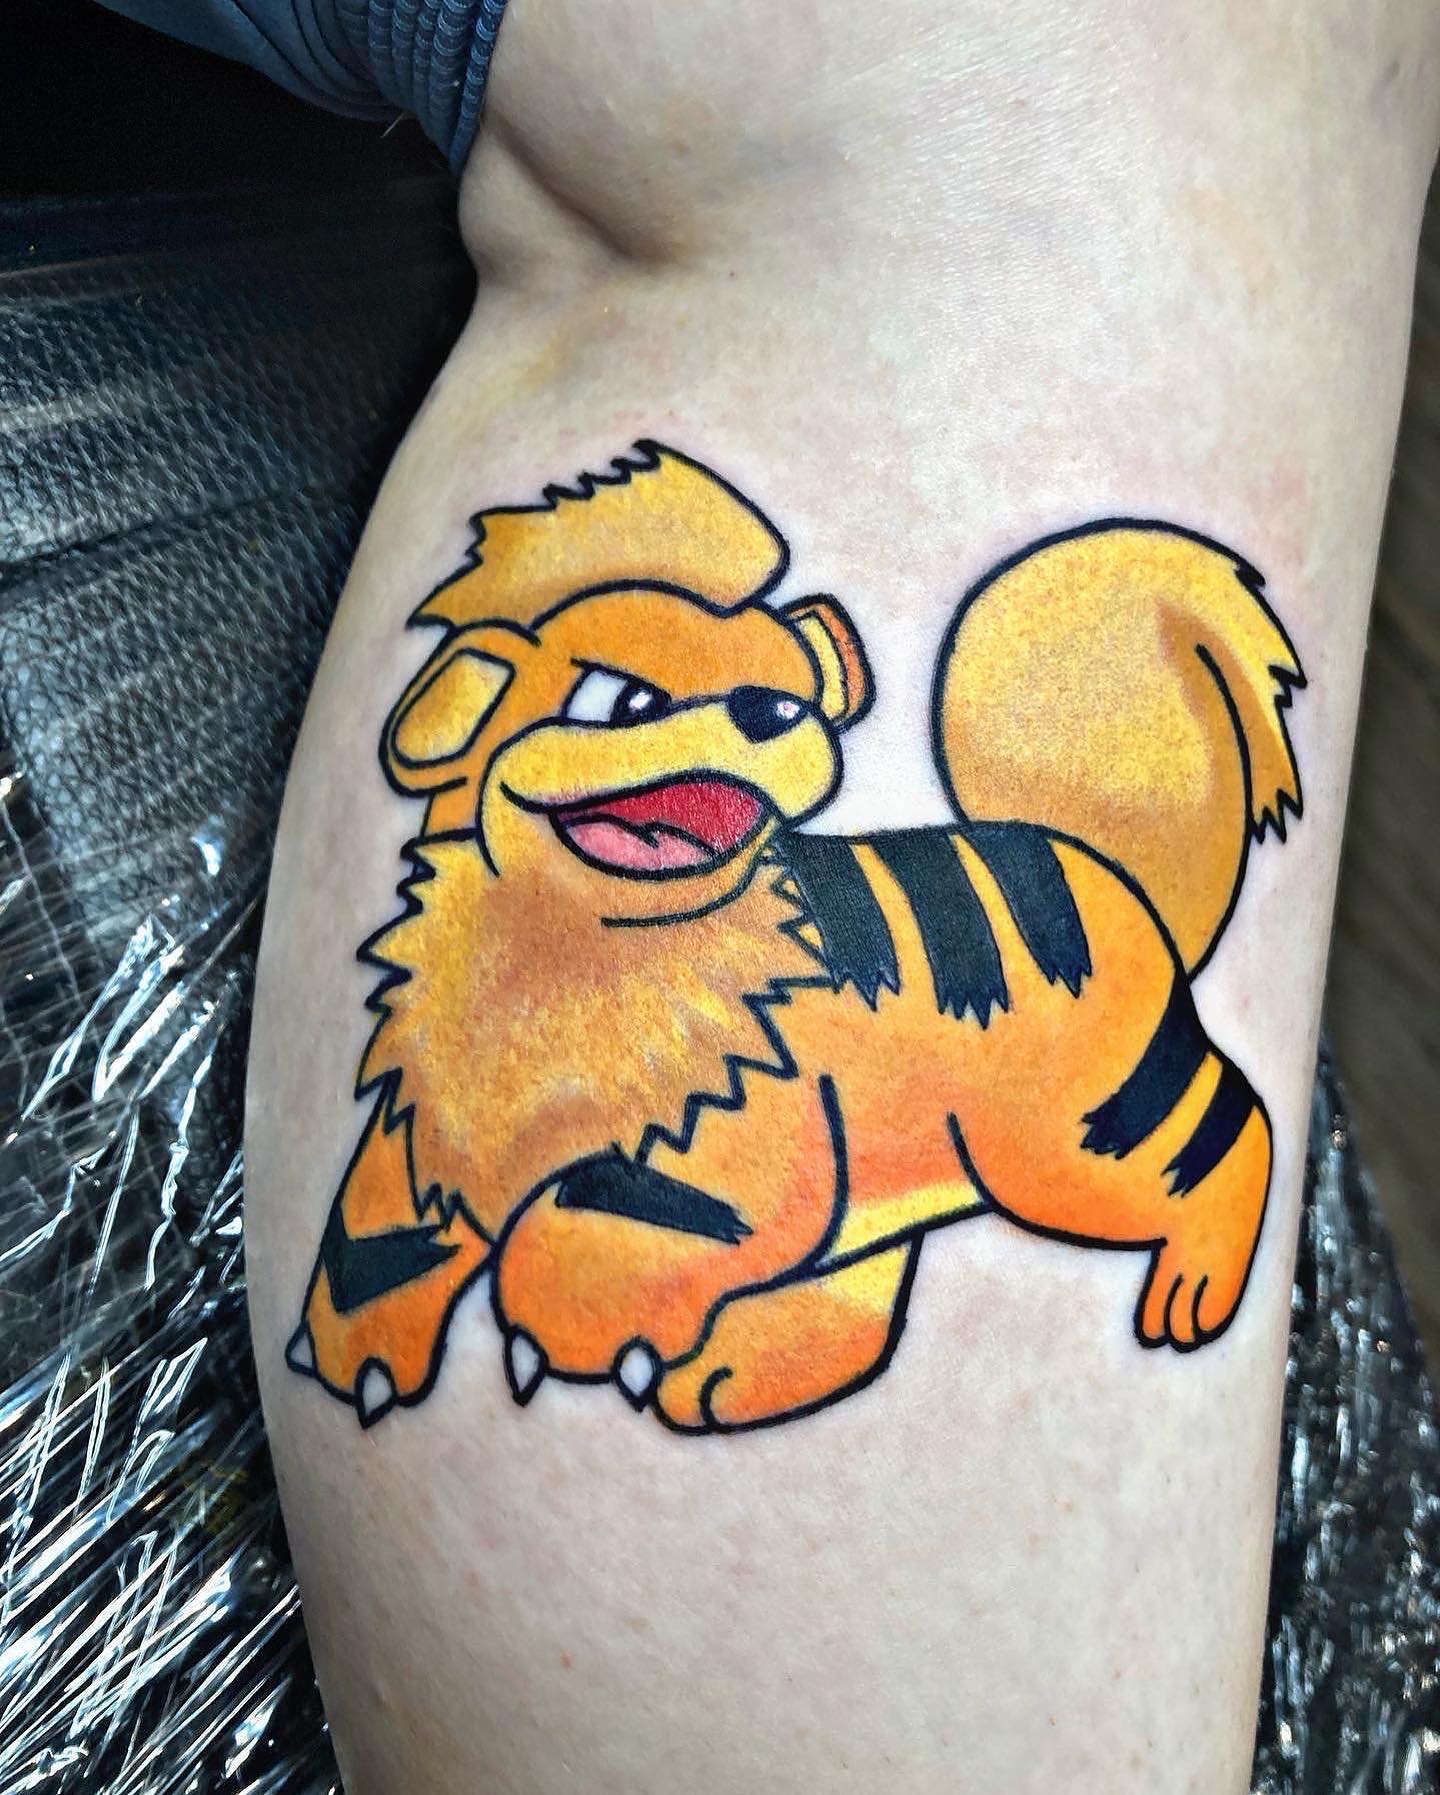 Growlithe is a fire-type Pokemon. It evolves from a puppy to a dog, an then into a ferocious beast. If you are considering getting this Pokemon tattooed on your body, just know that you will look great. So, go and get it!